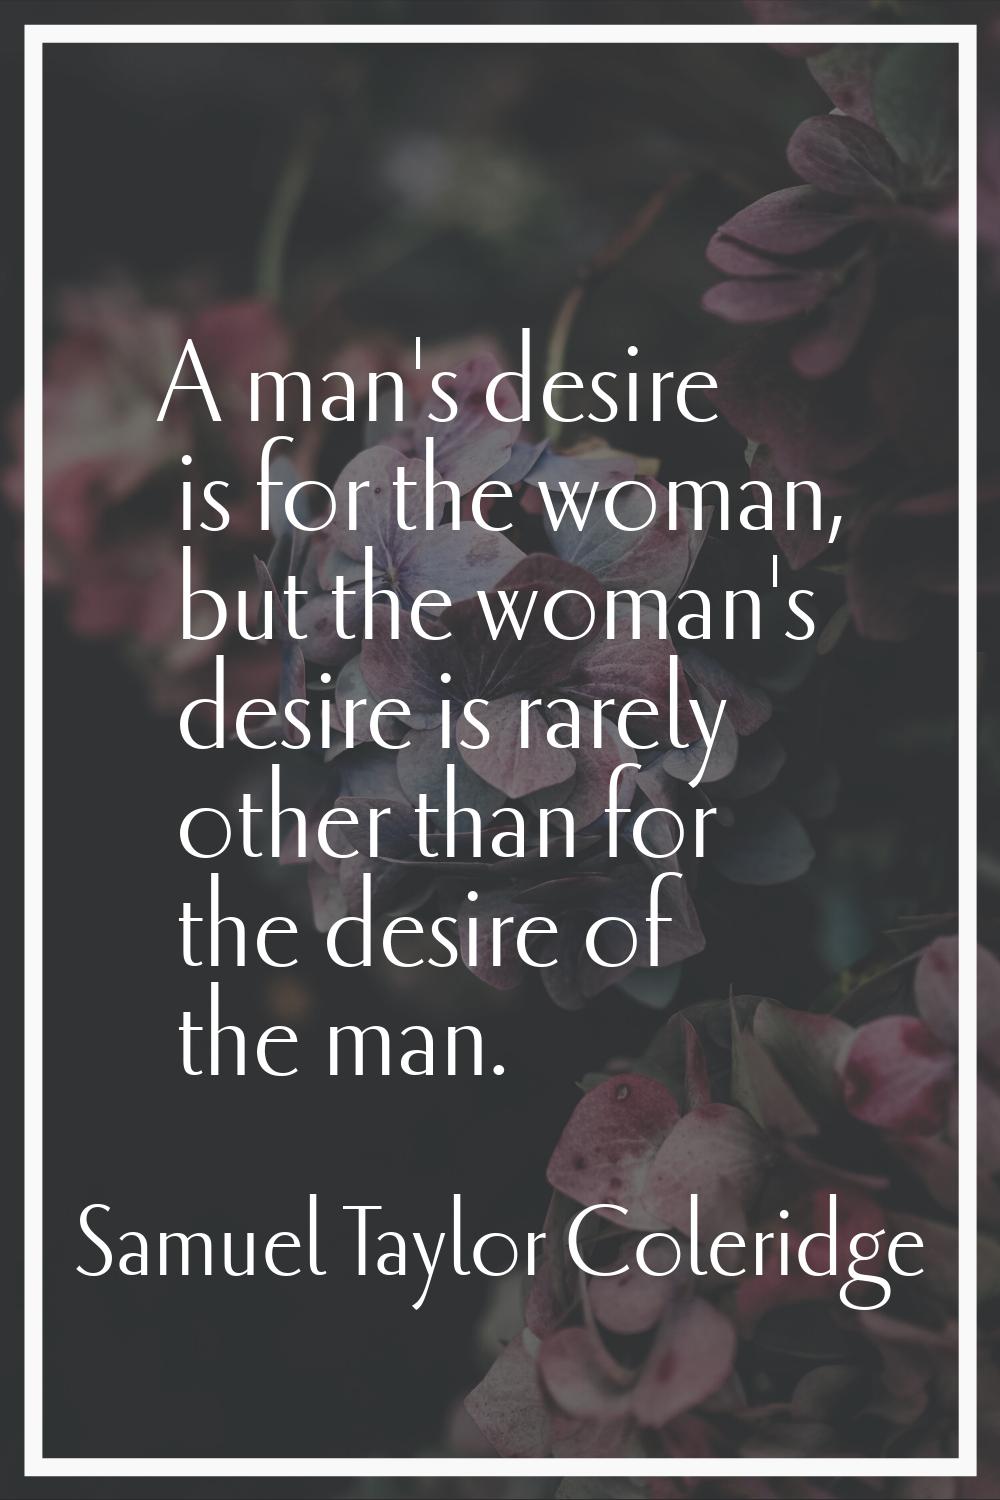 A man's desire is for the woman, but the woman's desire is rarely other than for the desire of the 